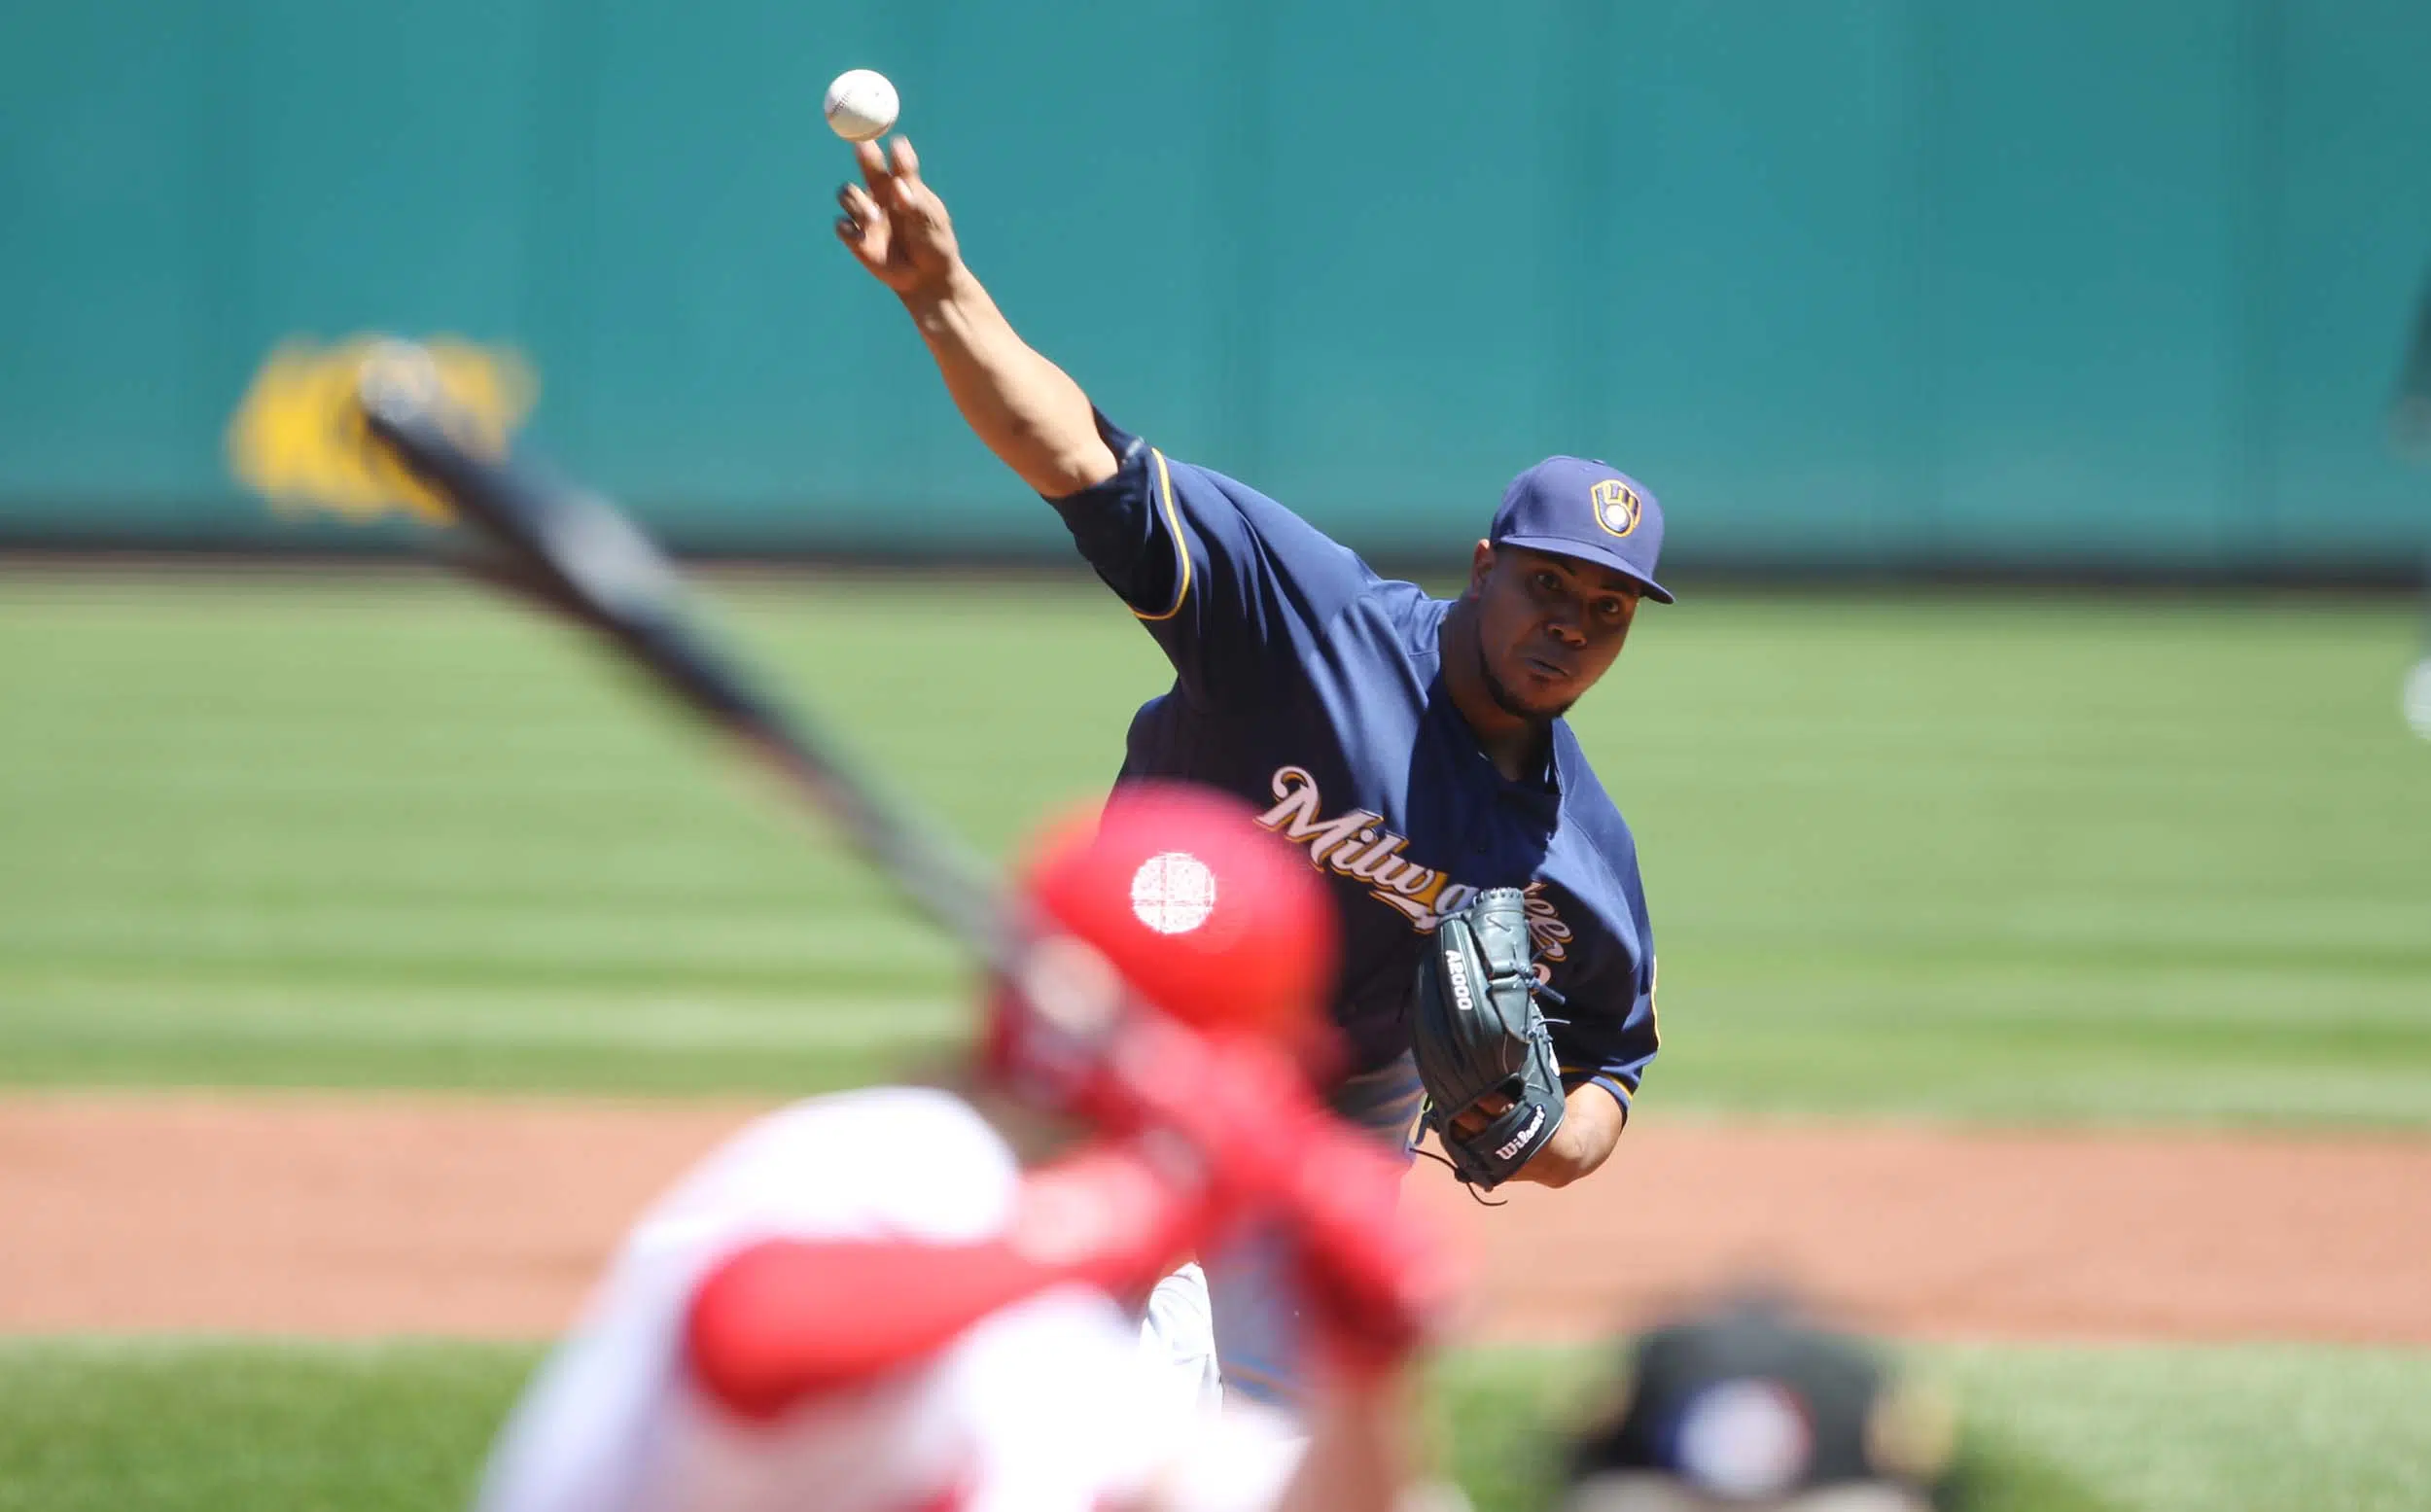 Peralta leads Brewers to first win of the season